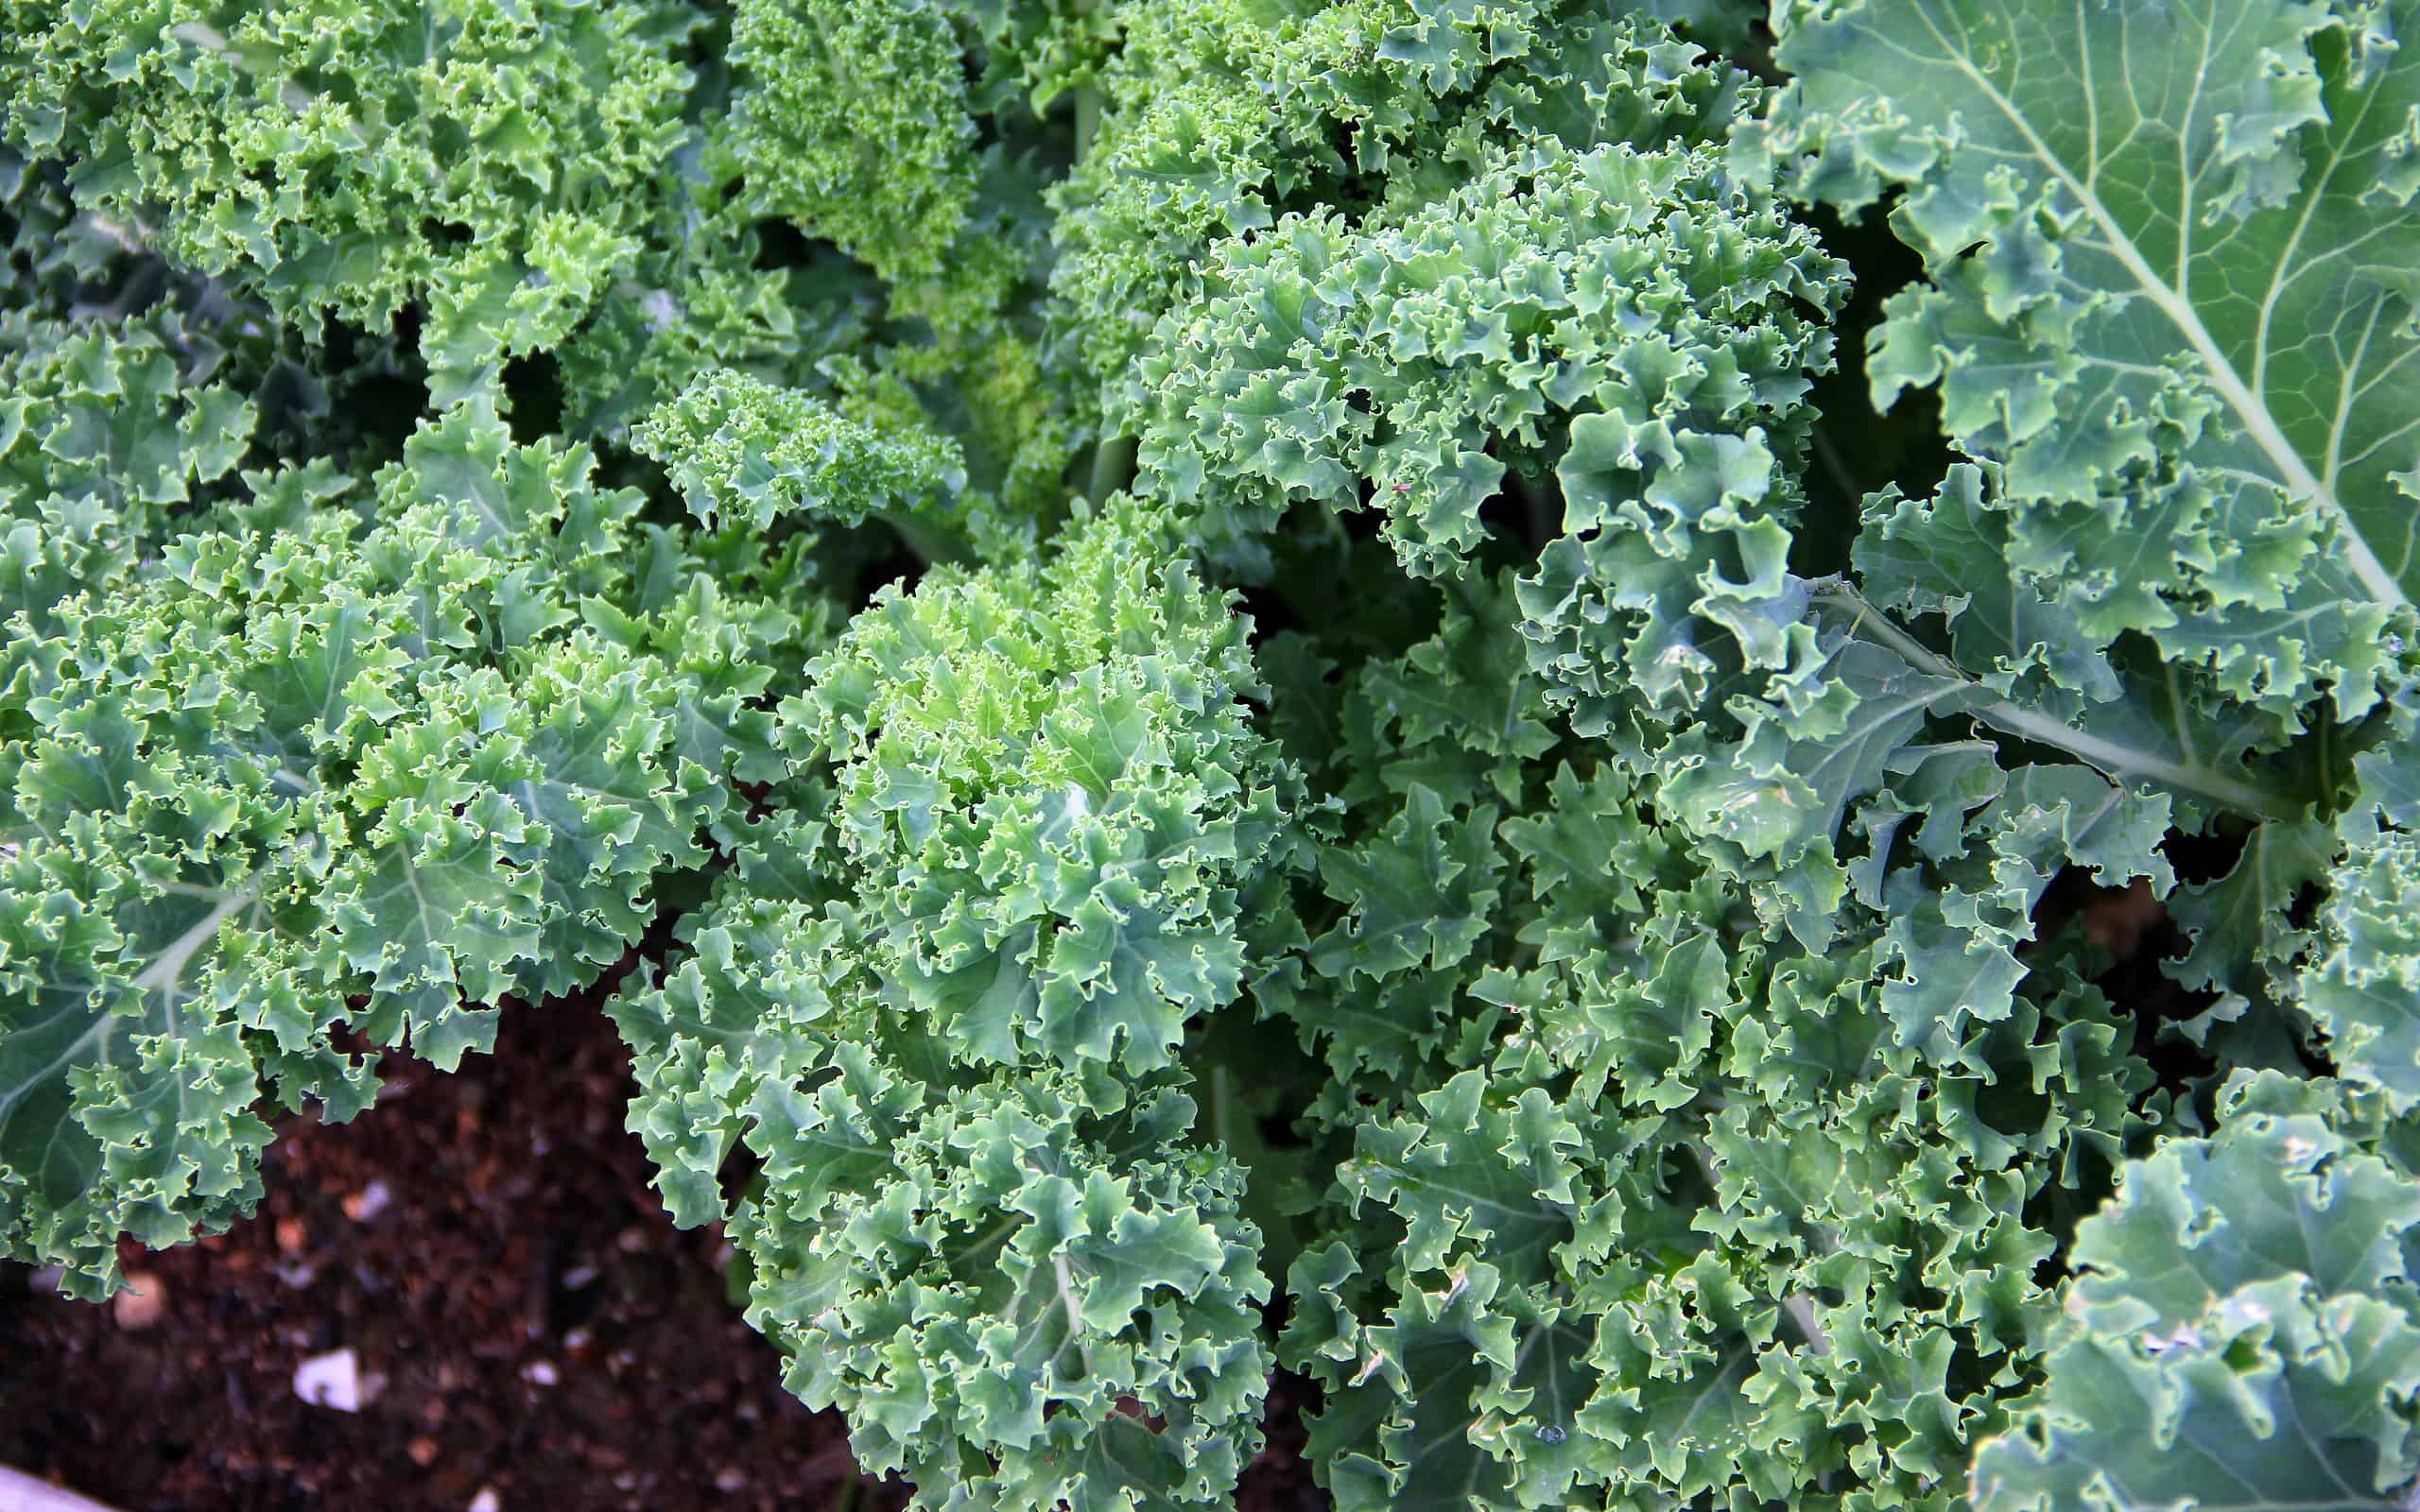 Organic kale growing in a raised bed garden